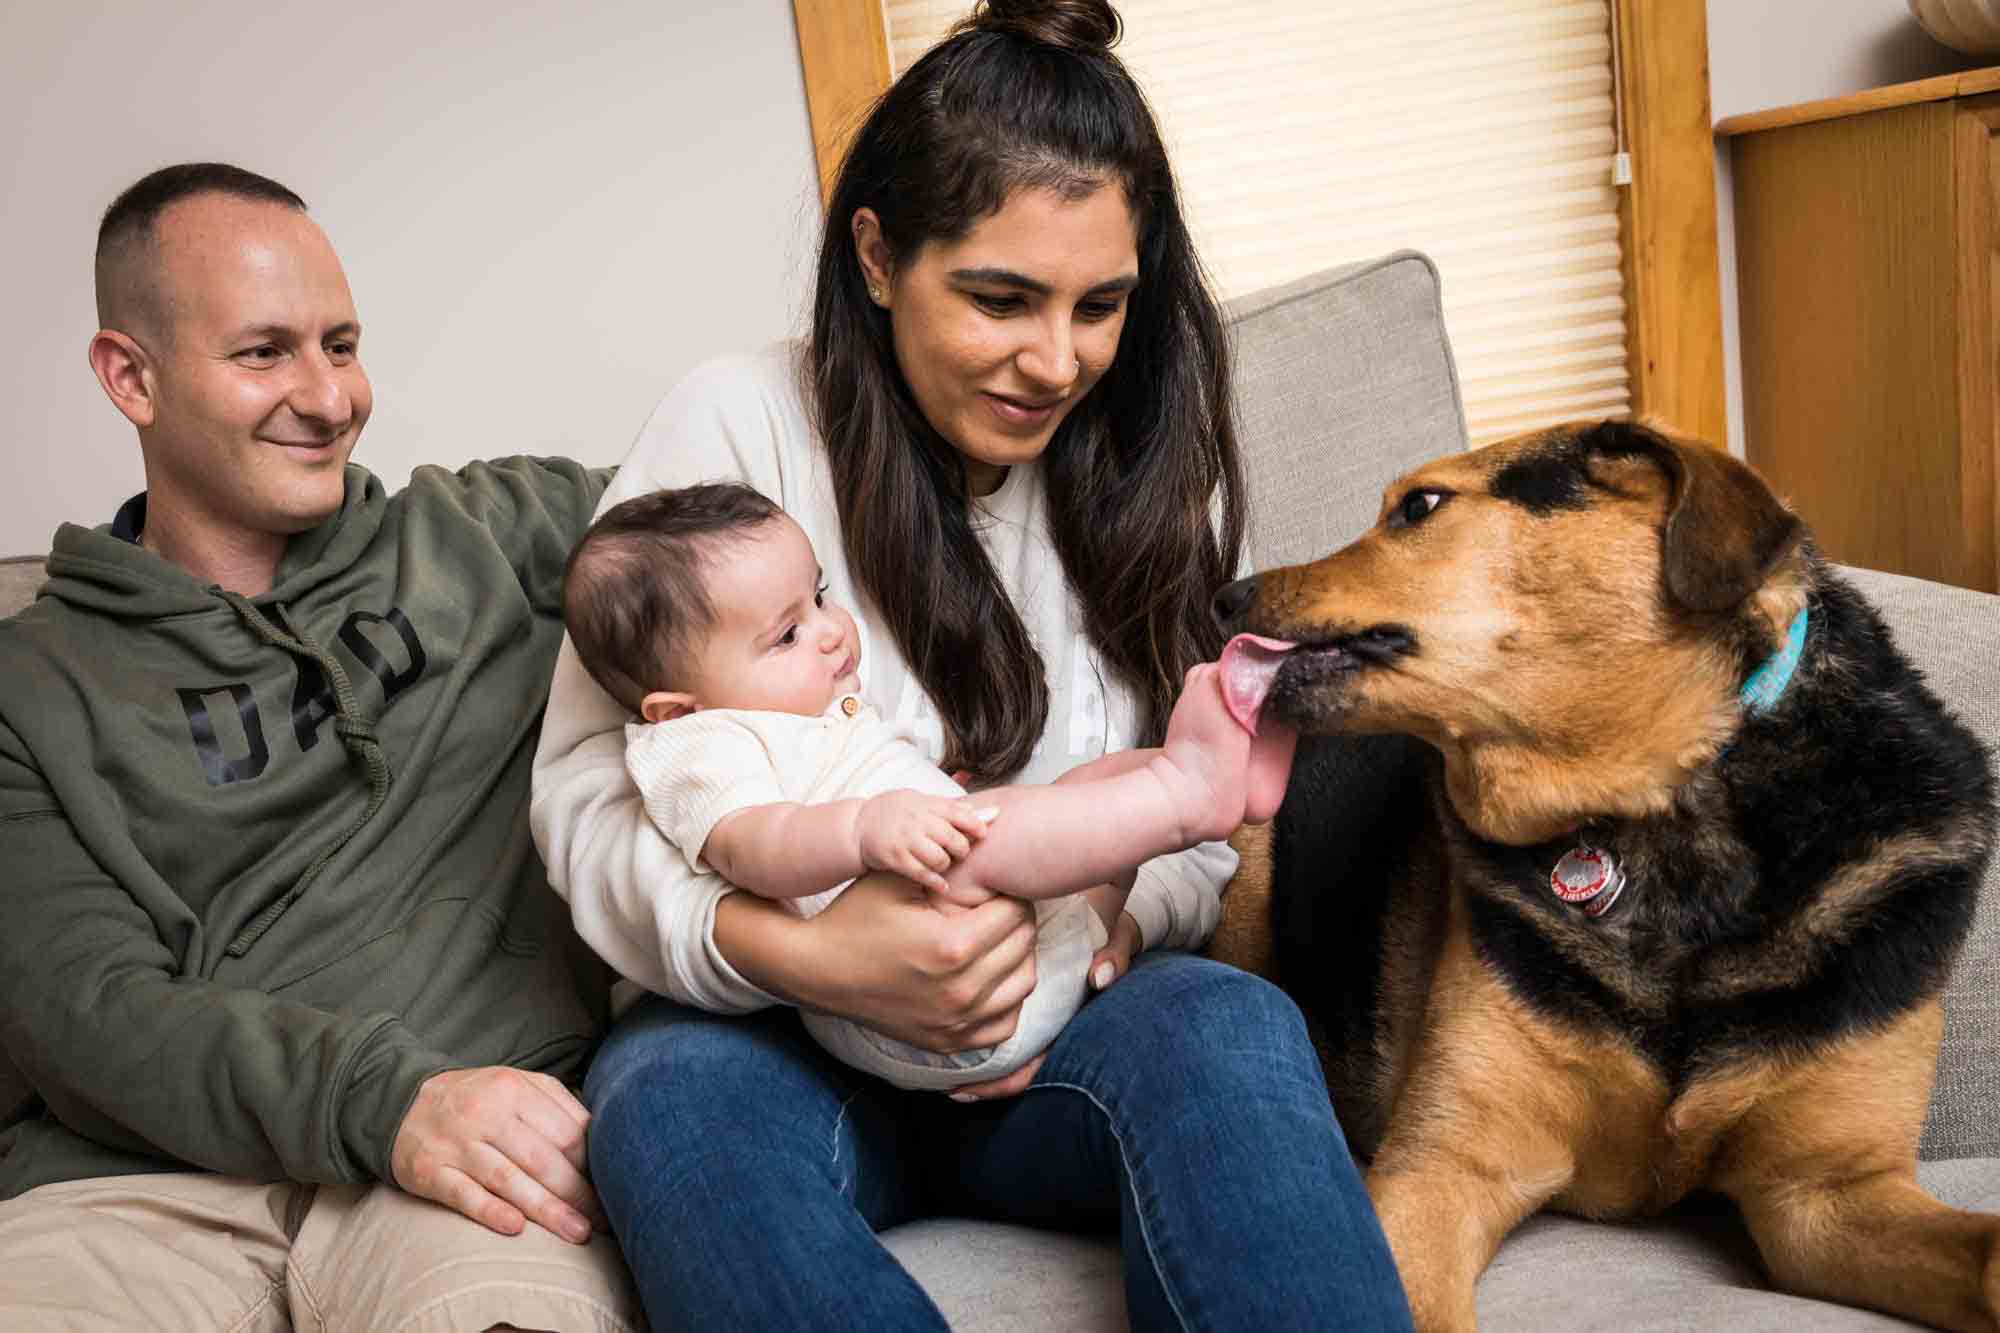 Mother holding baby on couch while dog licks baby's feet